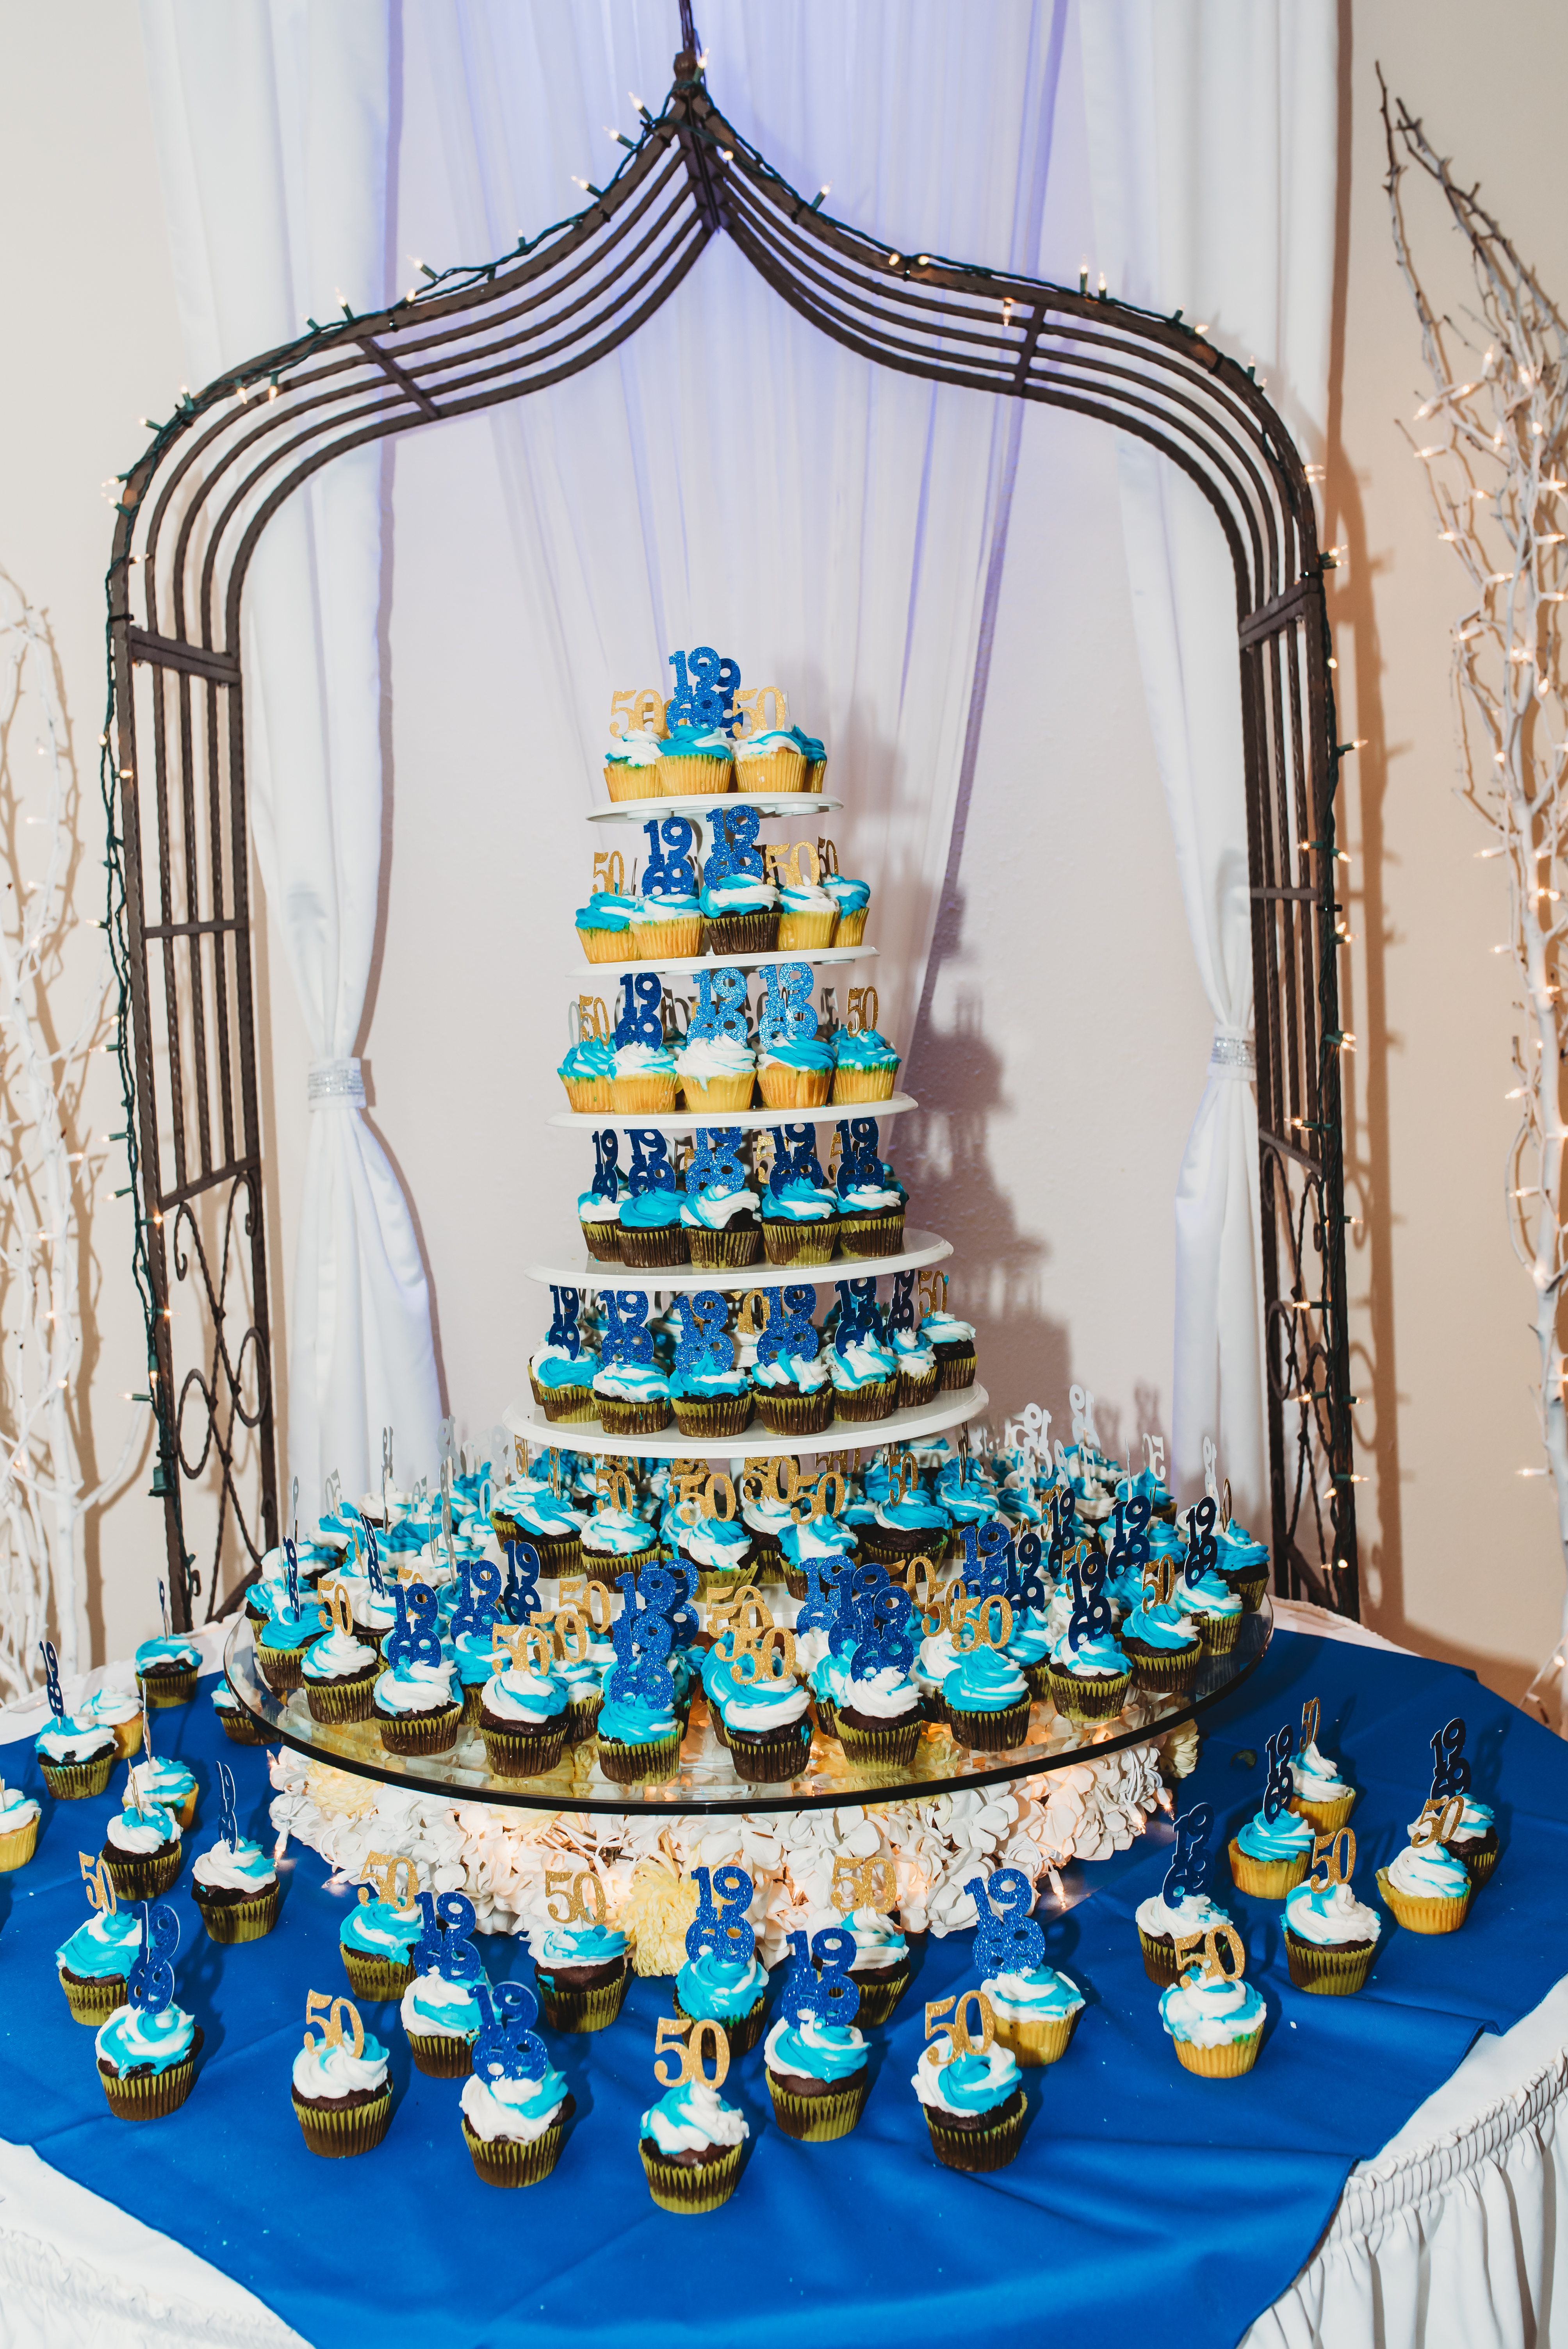 CUPCAKE DISPLAY by Karen Clubb,  Our Favorite Pastry Chef!